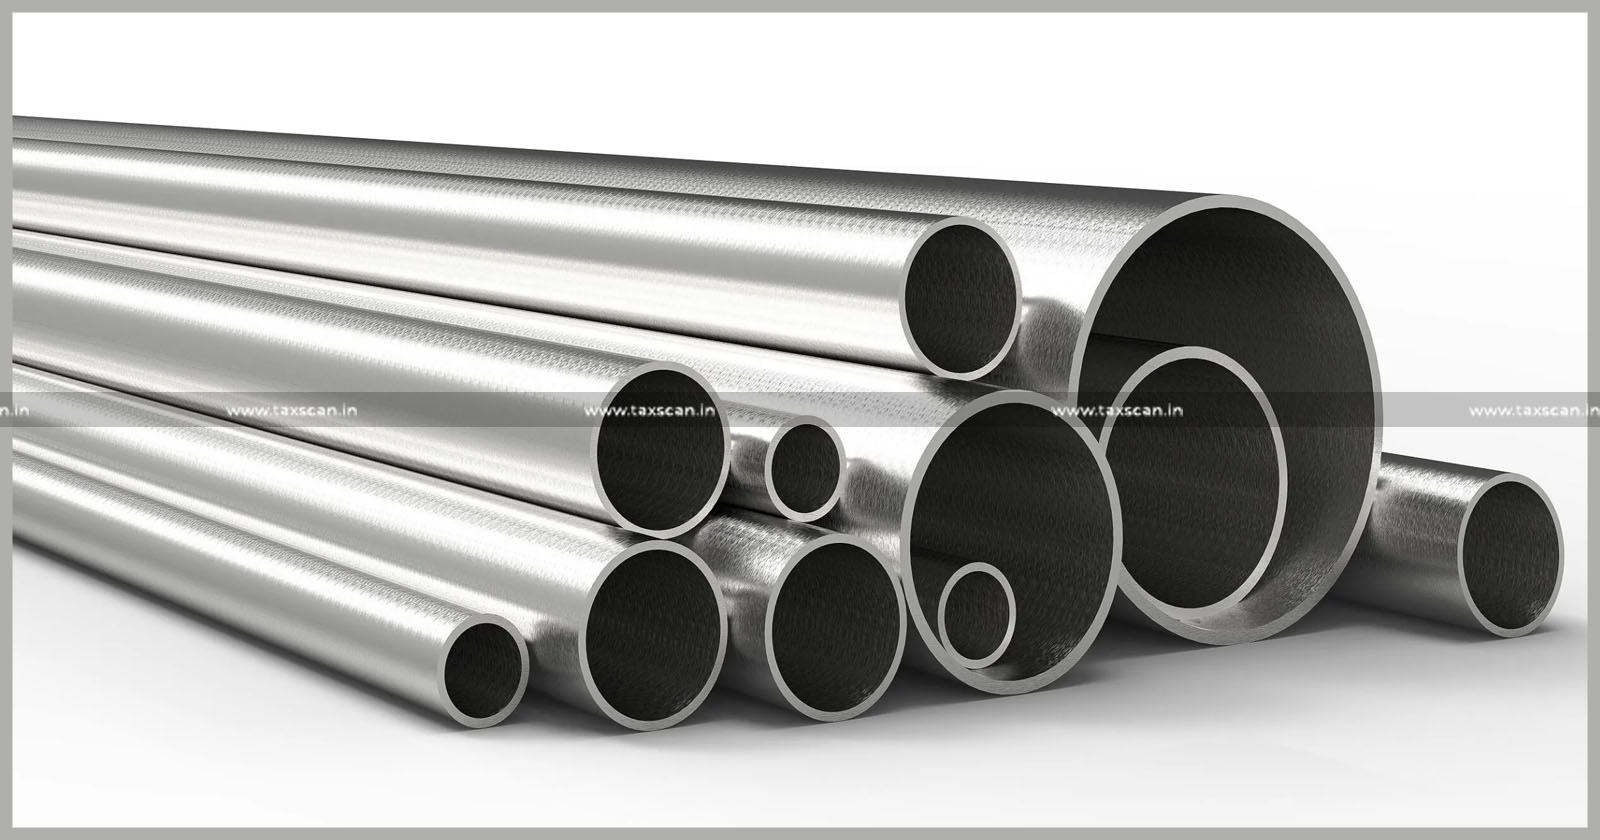 DGFT - Directorate General of Foreign Trade - Export Norms for Stainless Steel Pipes - DGFT stainless steel pipes export - Taxscan